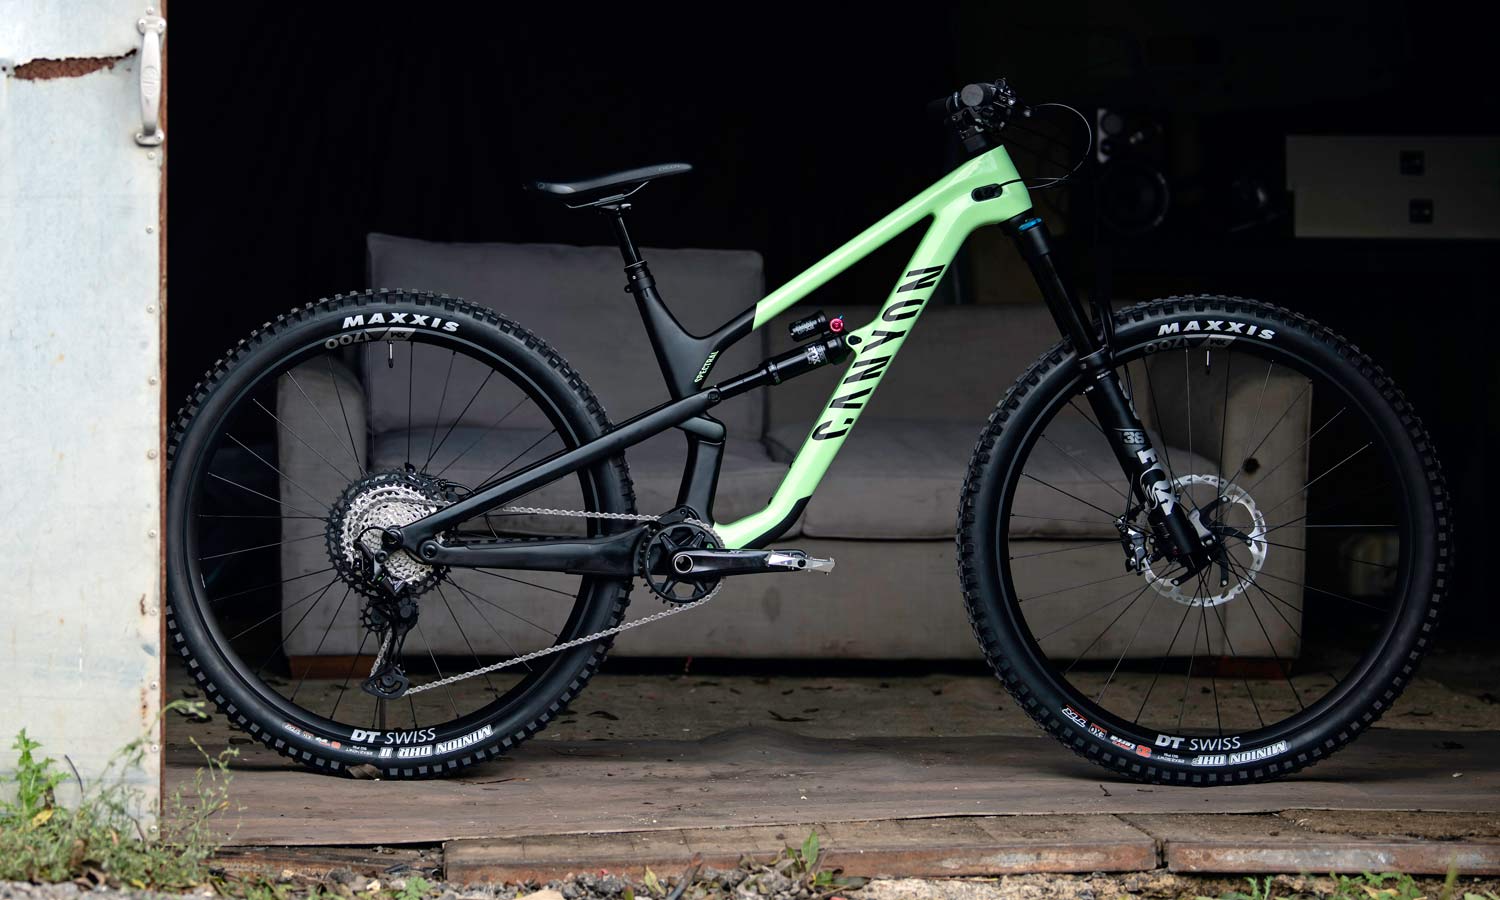 2021 Canyon Spectral 29 CF trail bike, lightweight carbon 150mm all-mountain bike, photo by Roo Fowler, barn complete